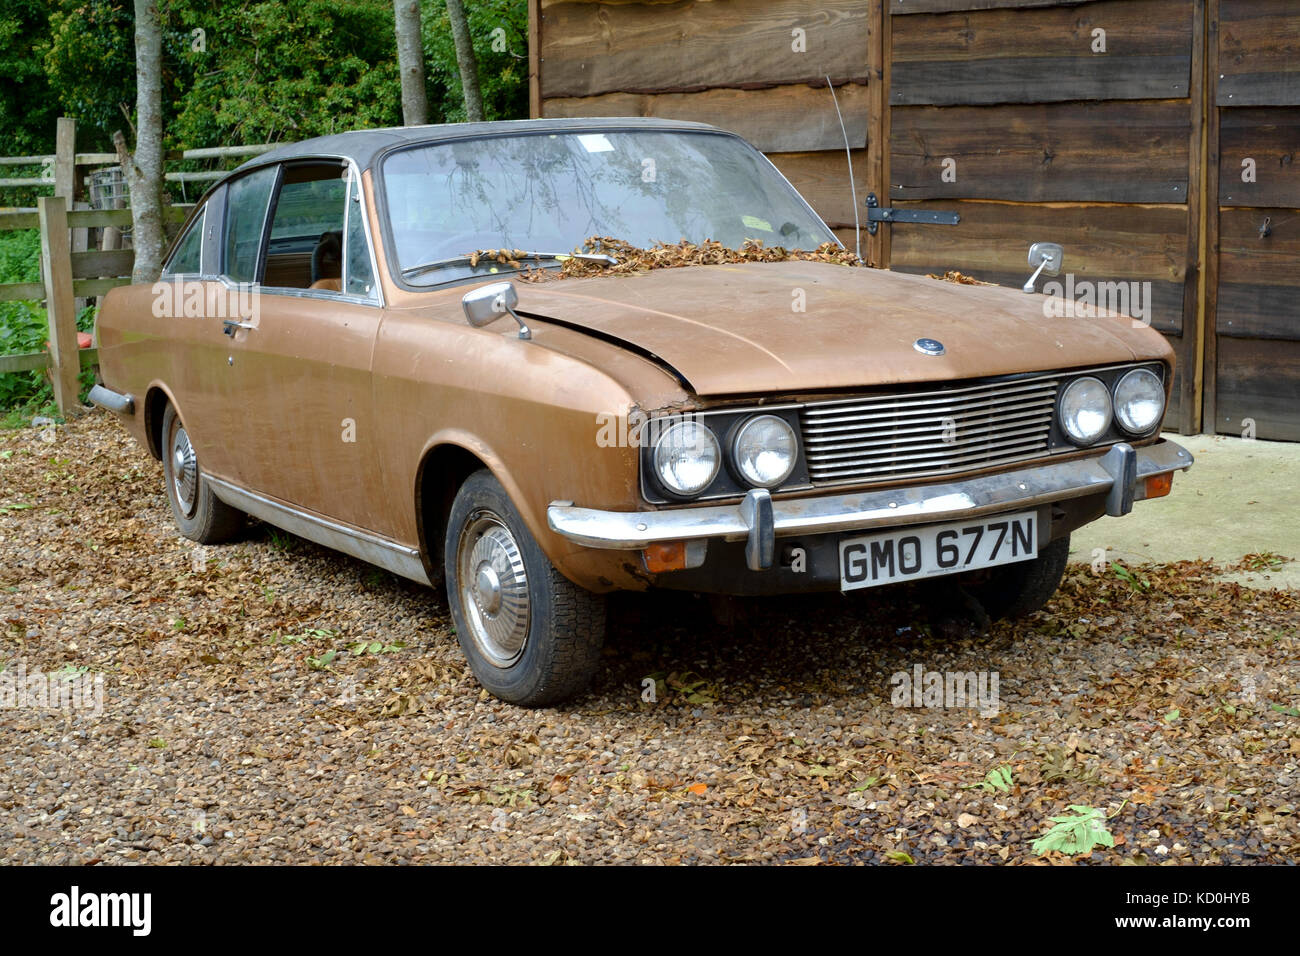 a barn find of a british sunbeam rapier car from the 1970s ready for restoration as a project Stock Photo